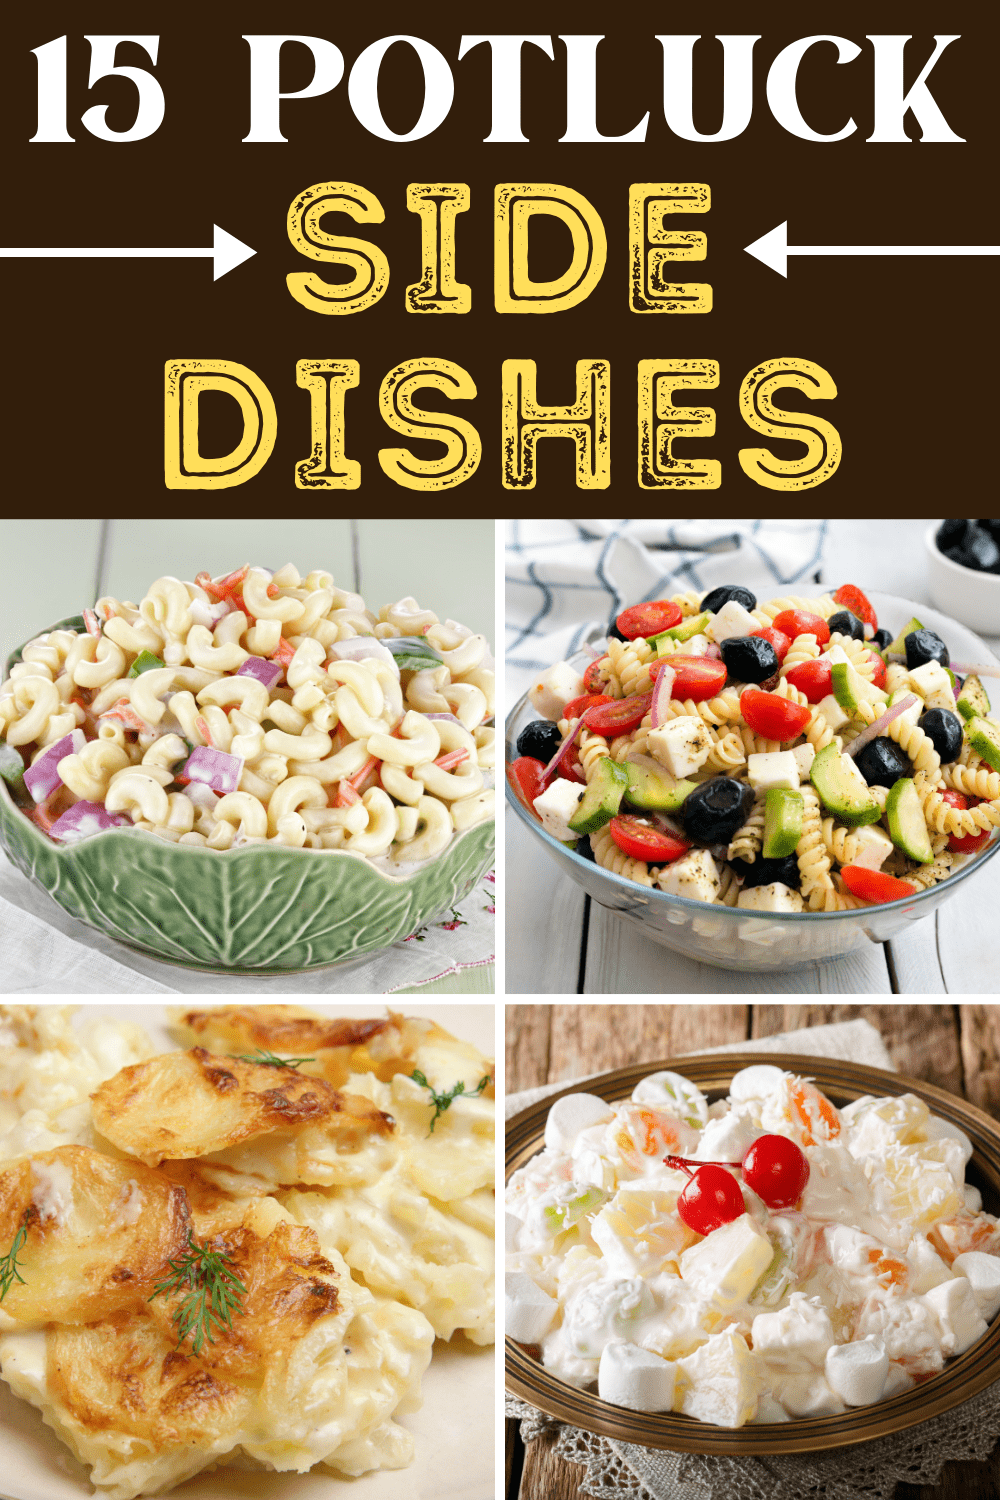 15 Best Potluck Side Dishes for Sharing - Insanely Good